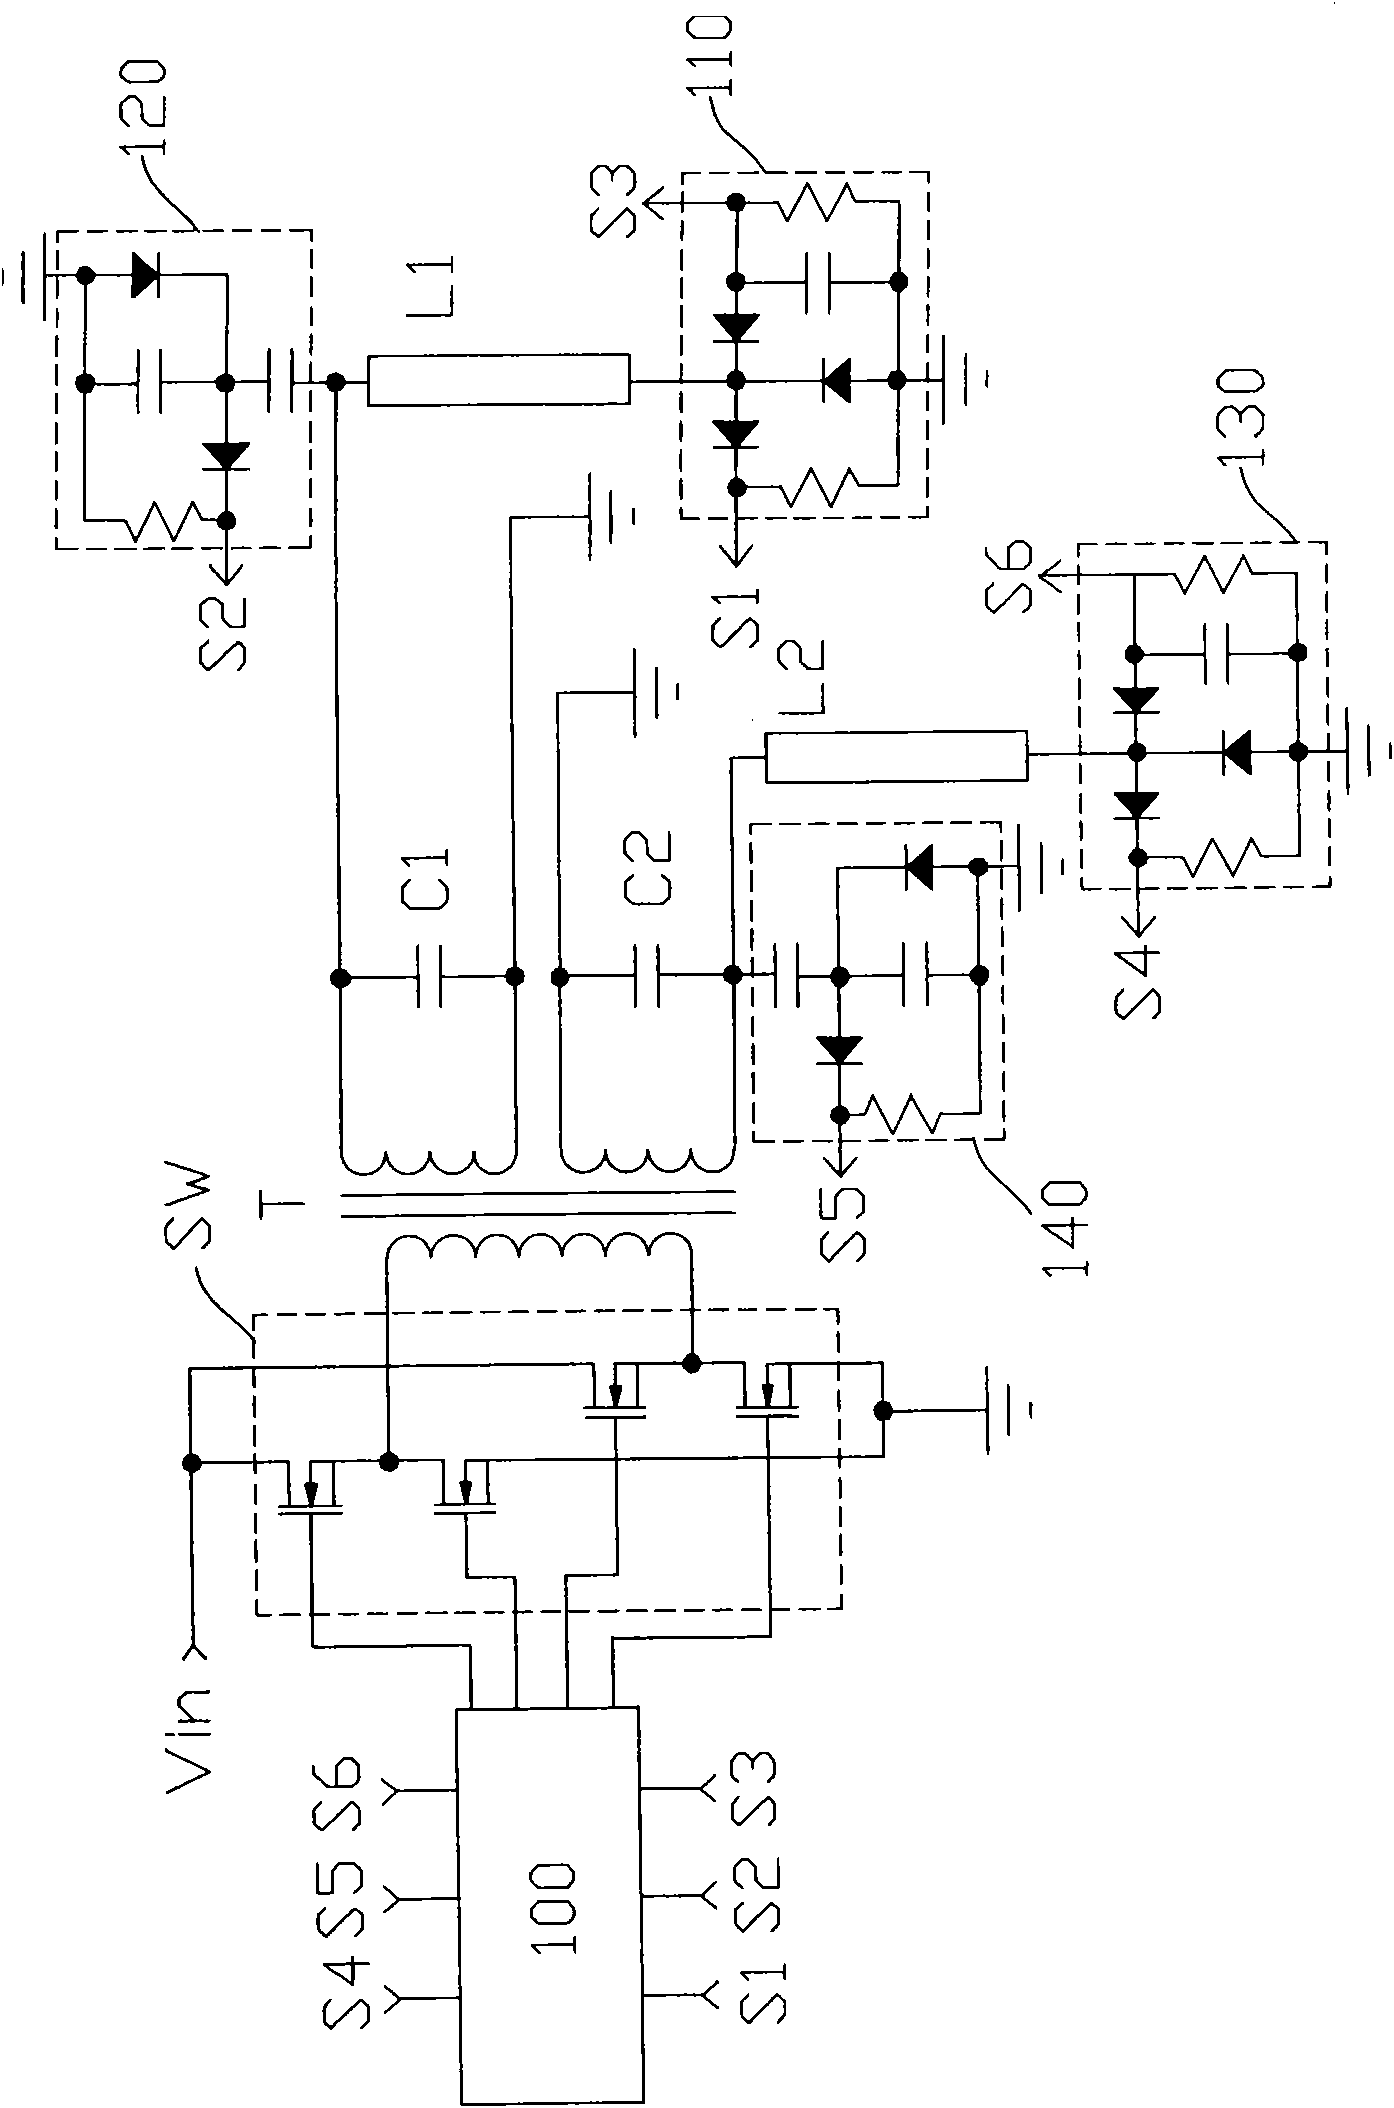 Drive circuit of fluorescent tube